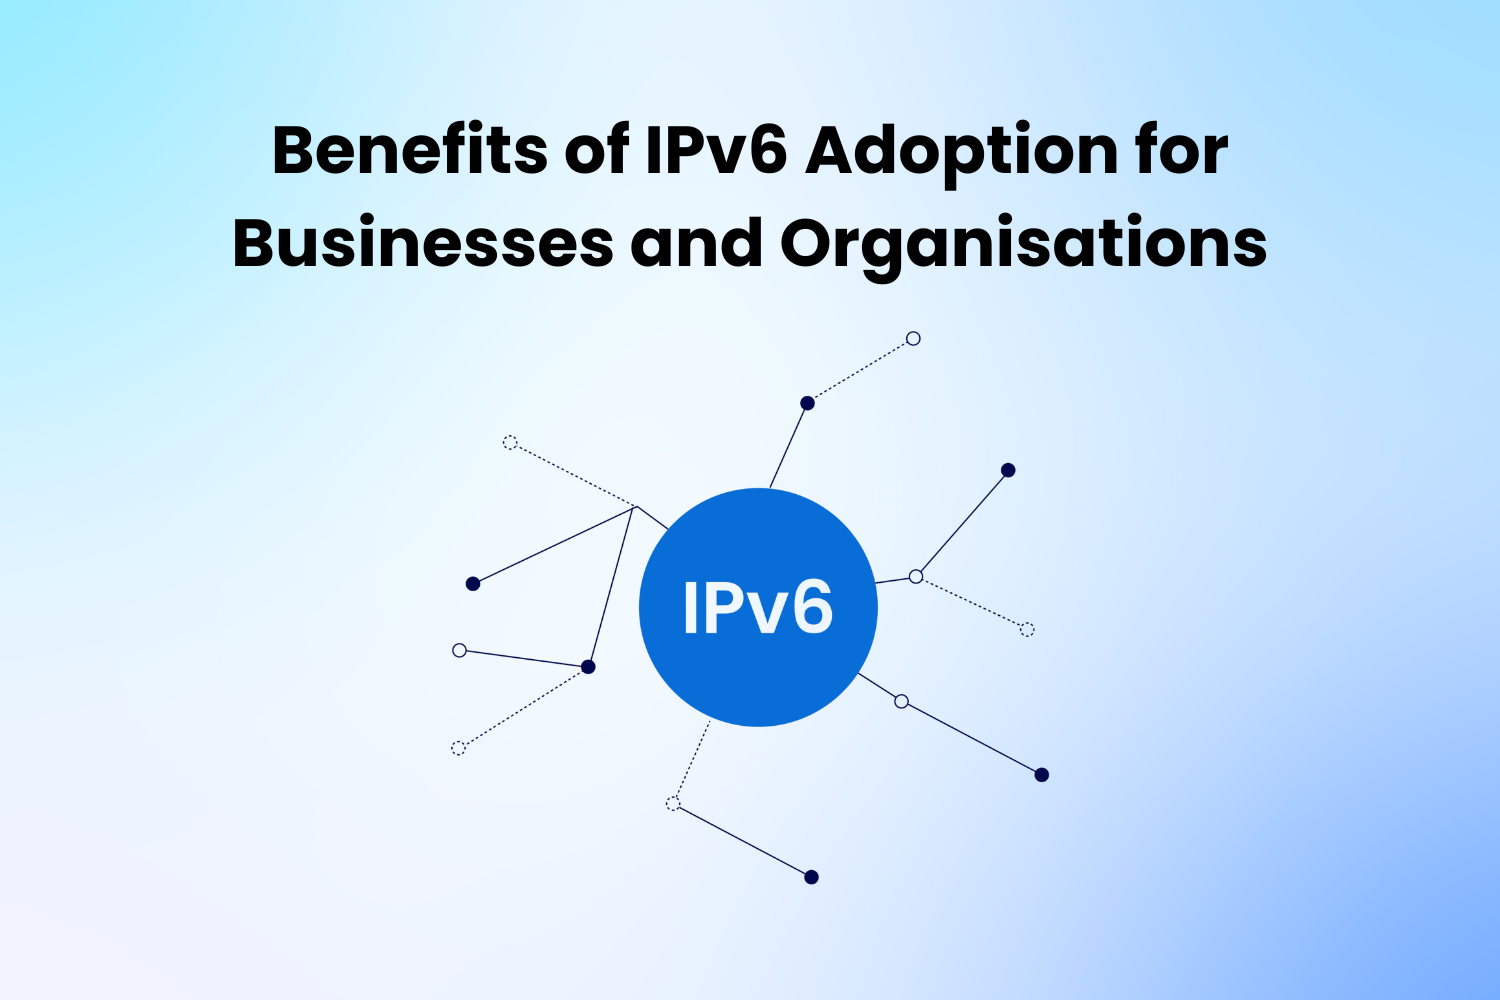 Benefits of IPv6 Adoption for Businesses and Organisations